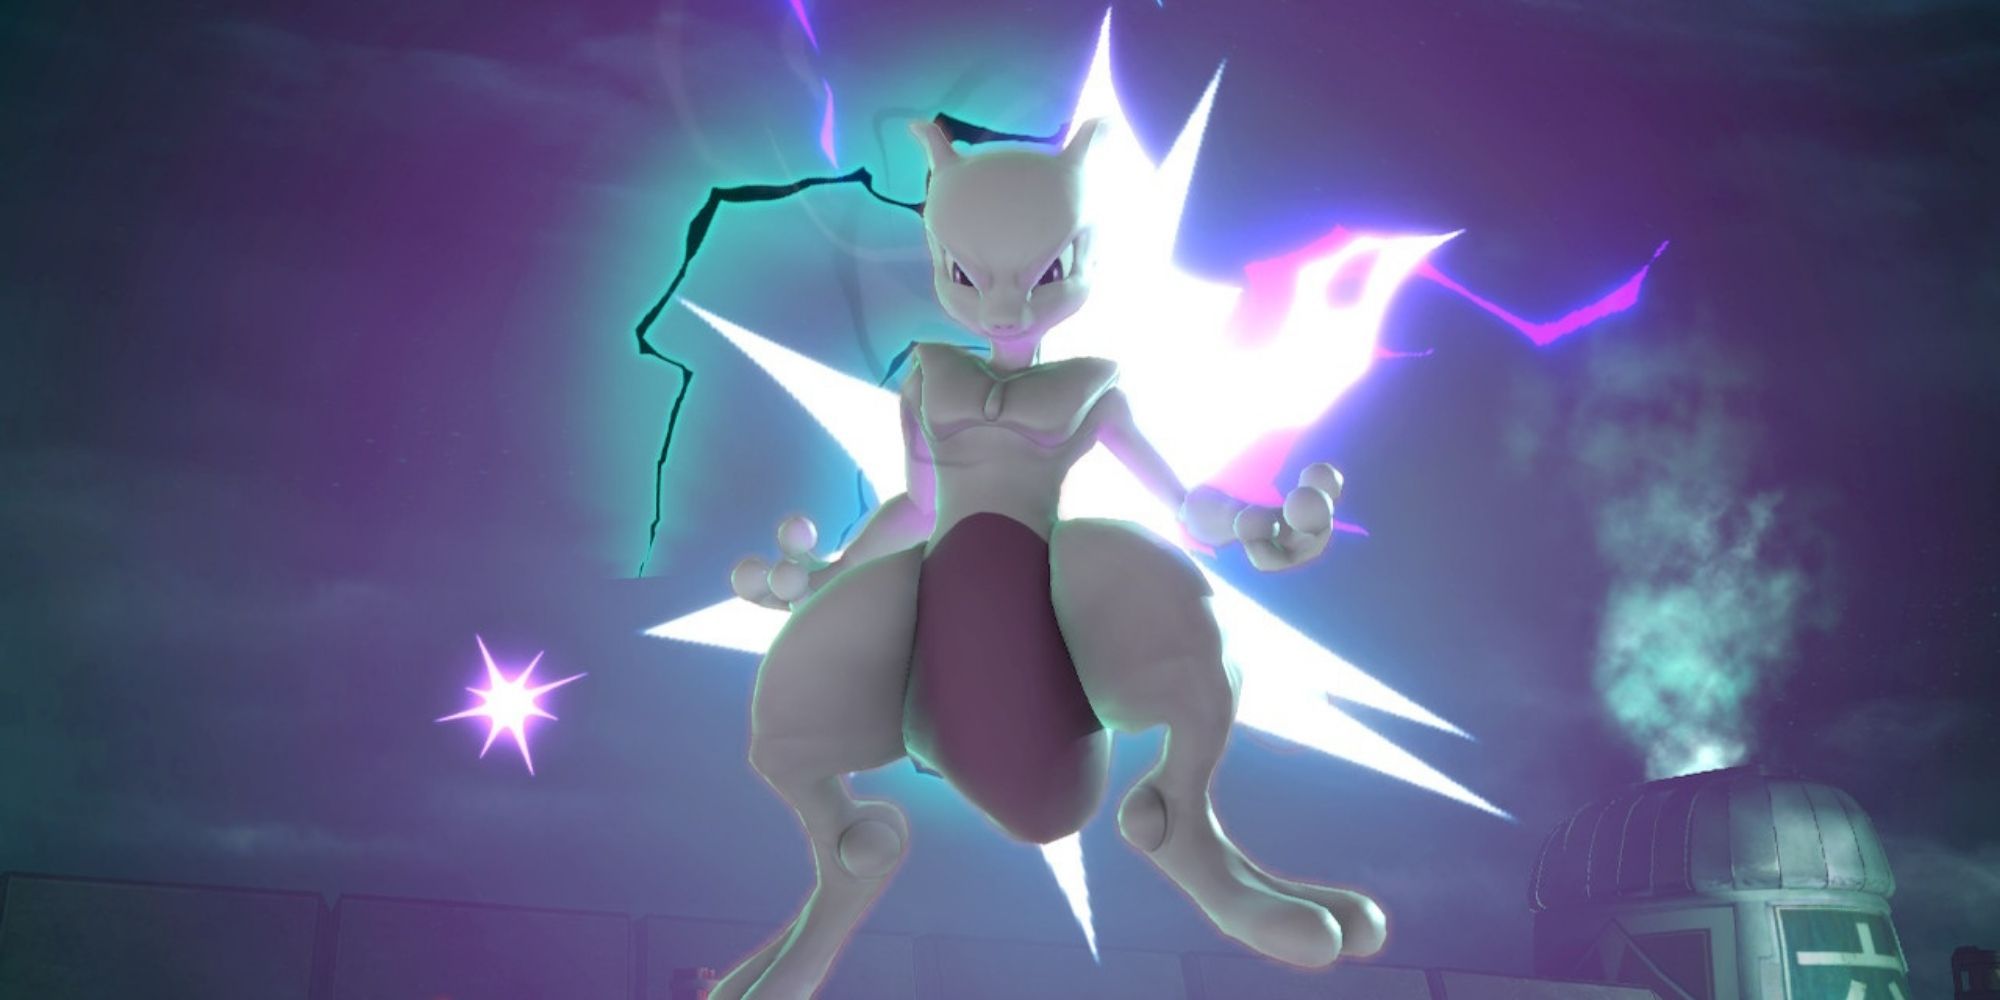 Mewtwo floats in the night sky in the Midgar stage